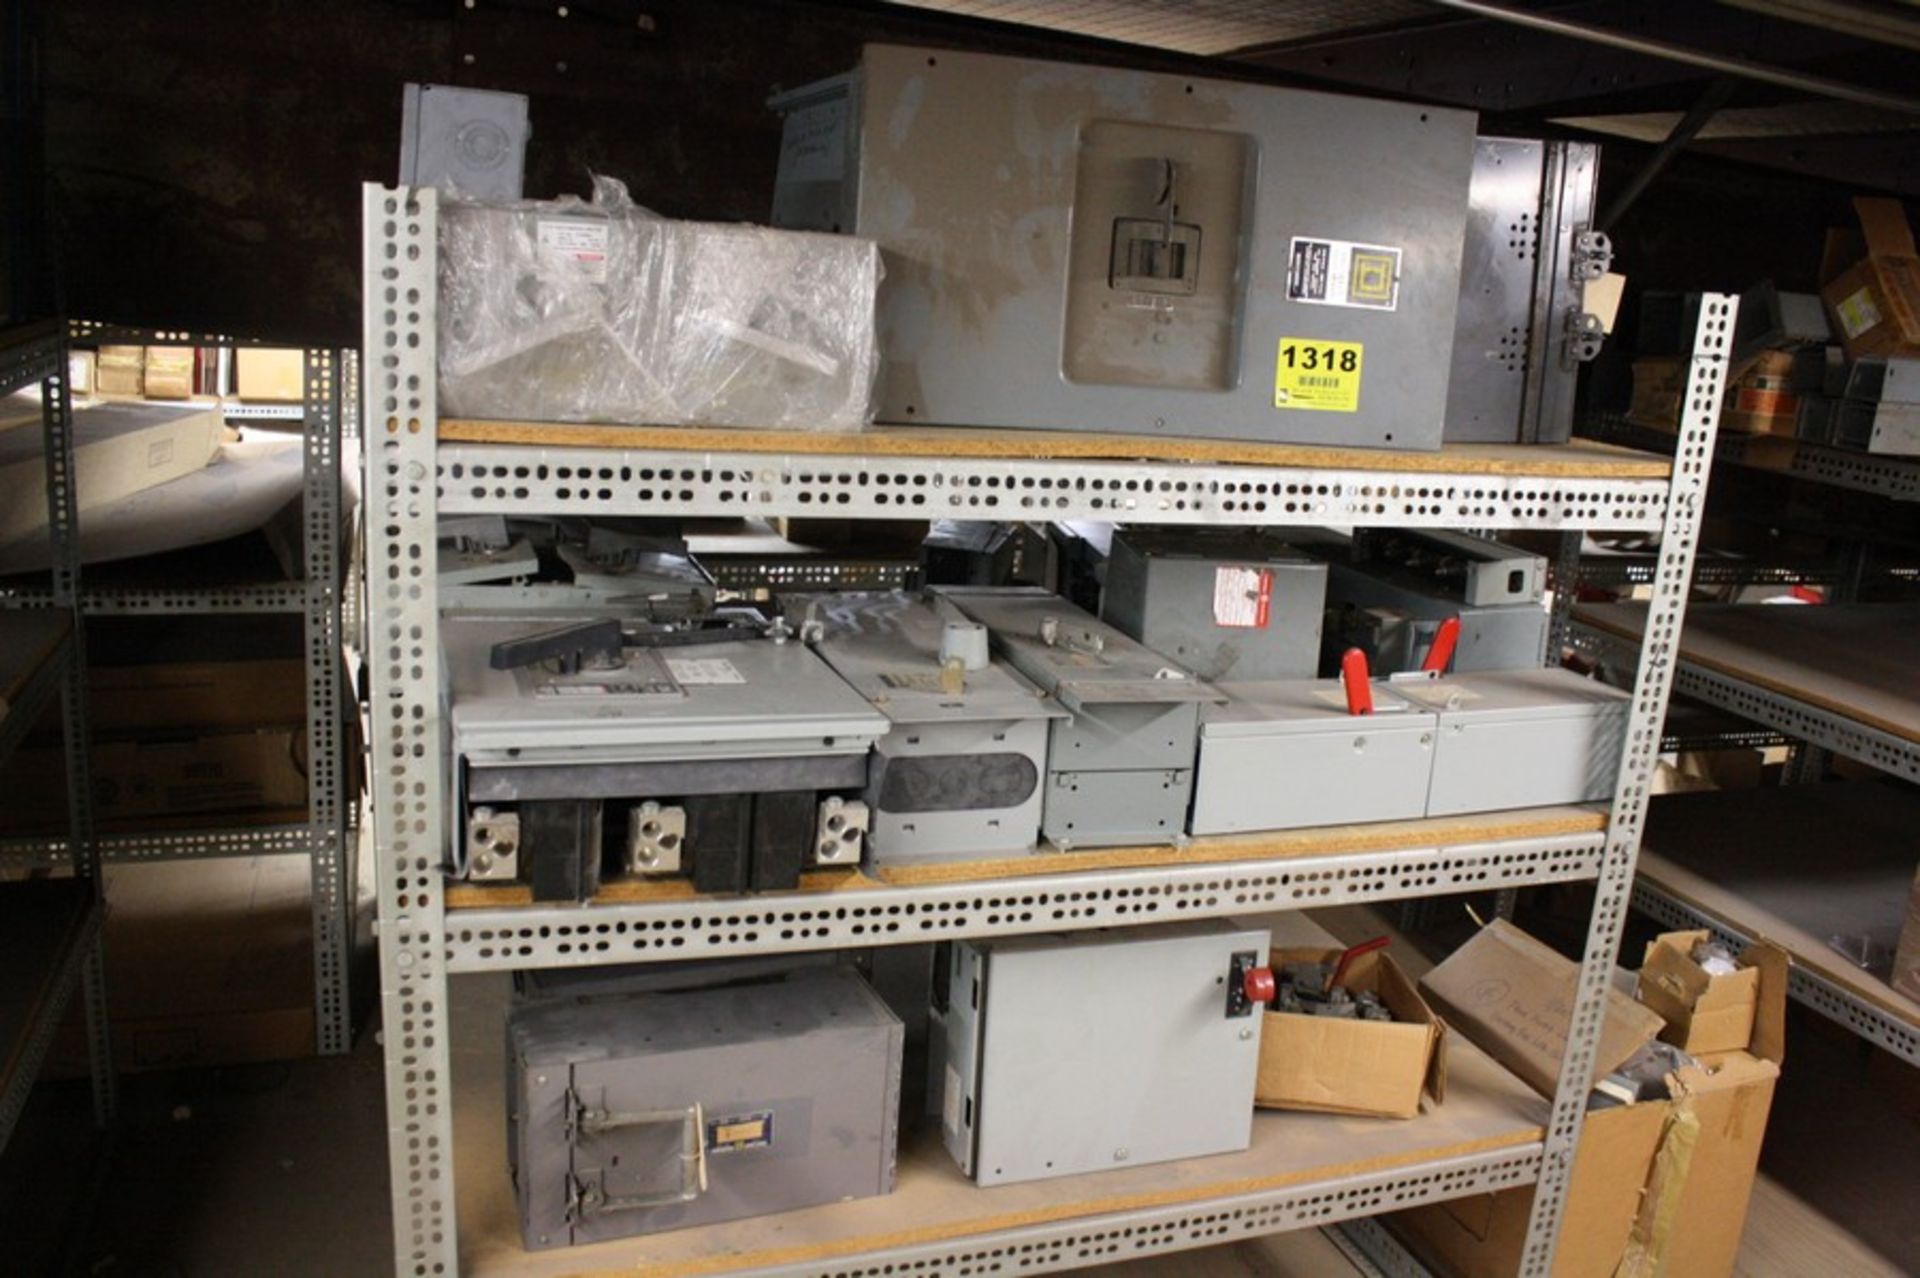 ASSORTED SWITCHES ON SHELVING UNIT